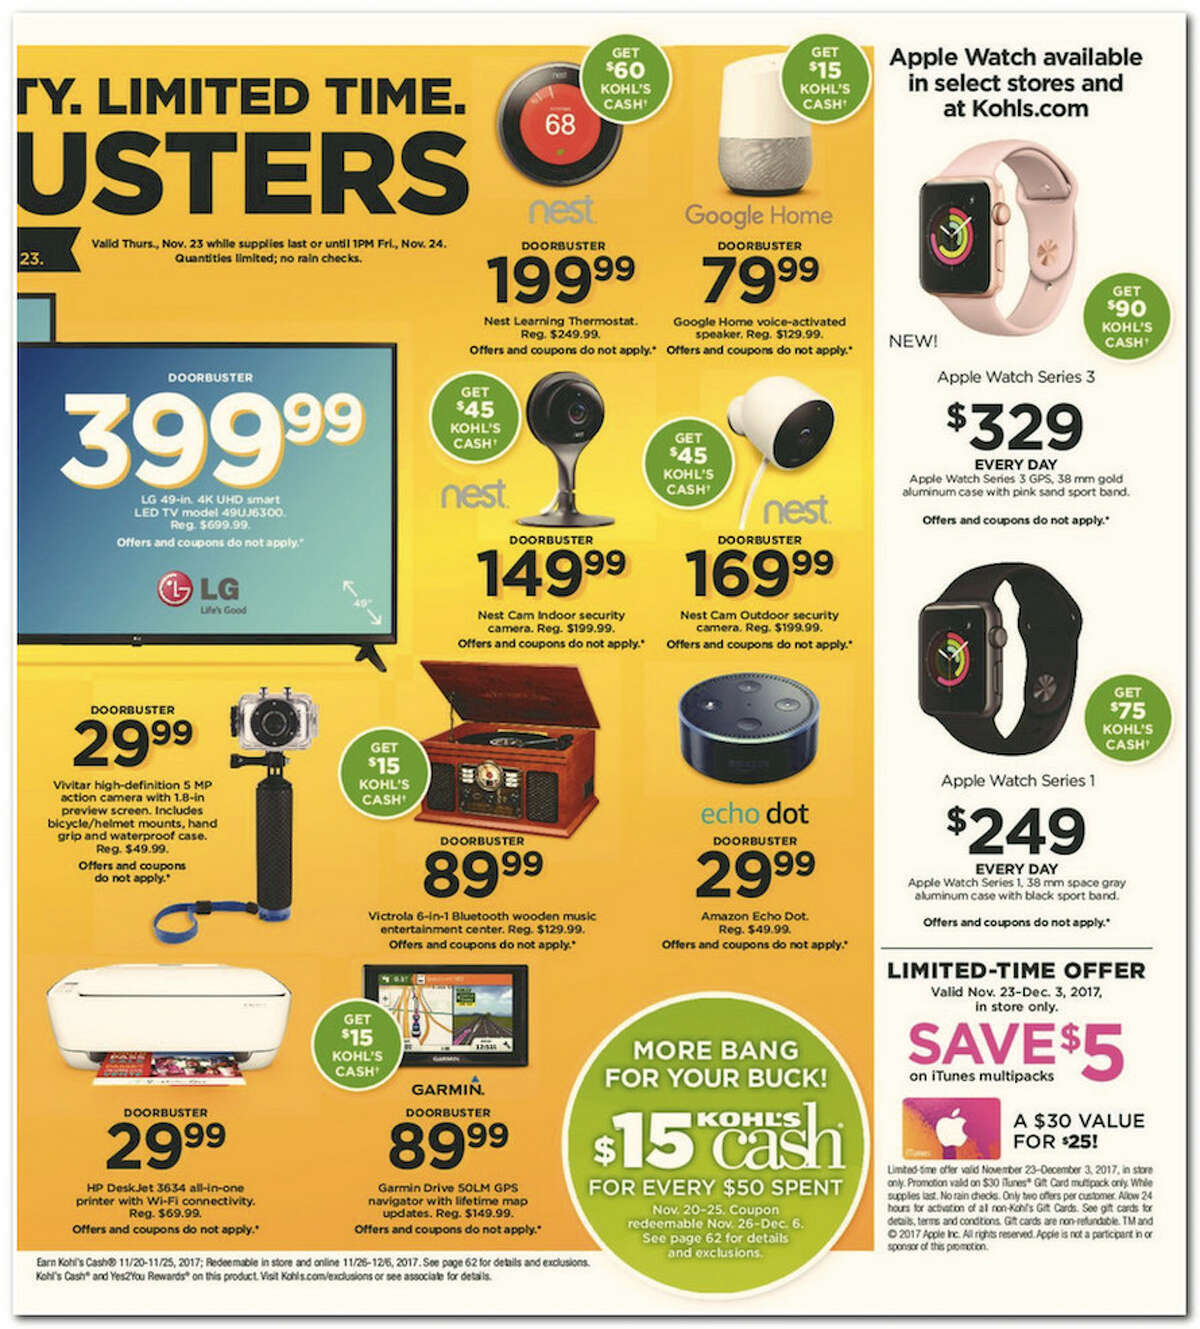 Kohl's has released its 64-page 2017 Black Friday Doorbuster ad. Prices and promotion are valid Thursday, Nov. 23 at 5 p.m. and are subject to change and availability, based on the retailer's determination.